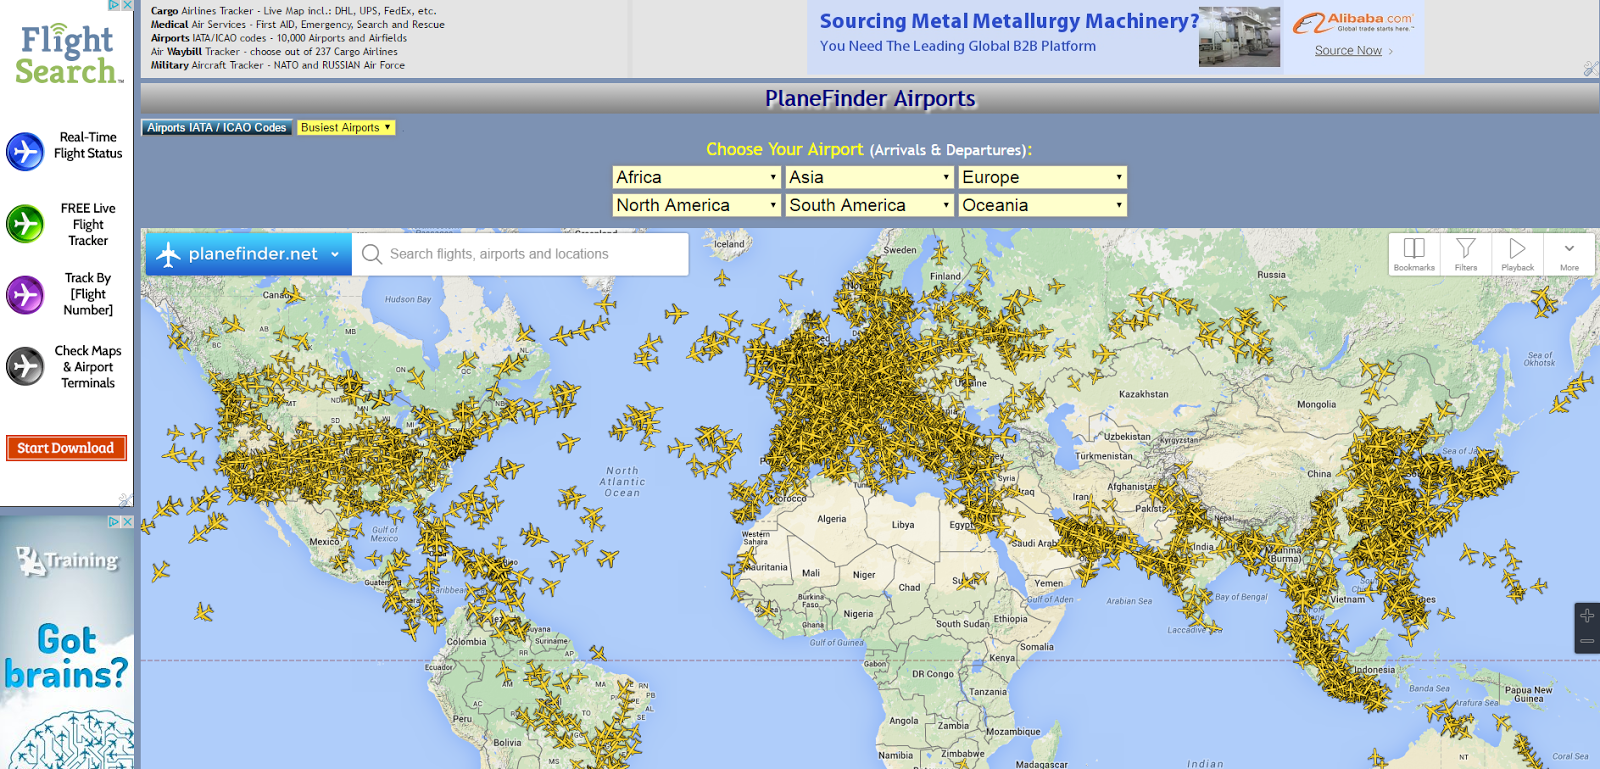 Airlines tracking